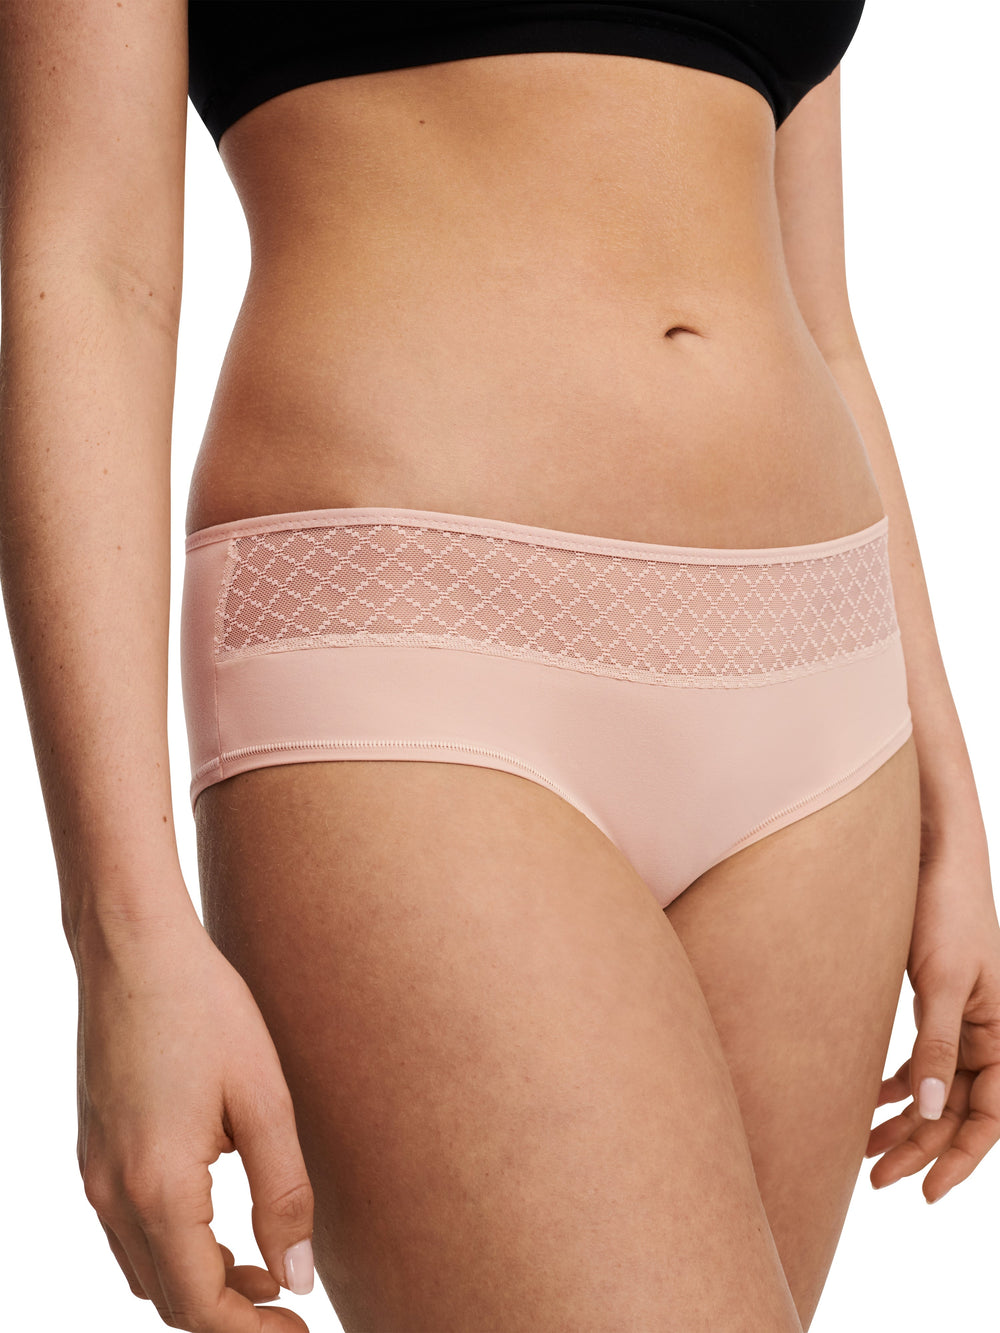 Chantelle EasyFeel - Norah Chic Covering Shorty Dusky Pink Shorty Chantelle EasyFeel